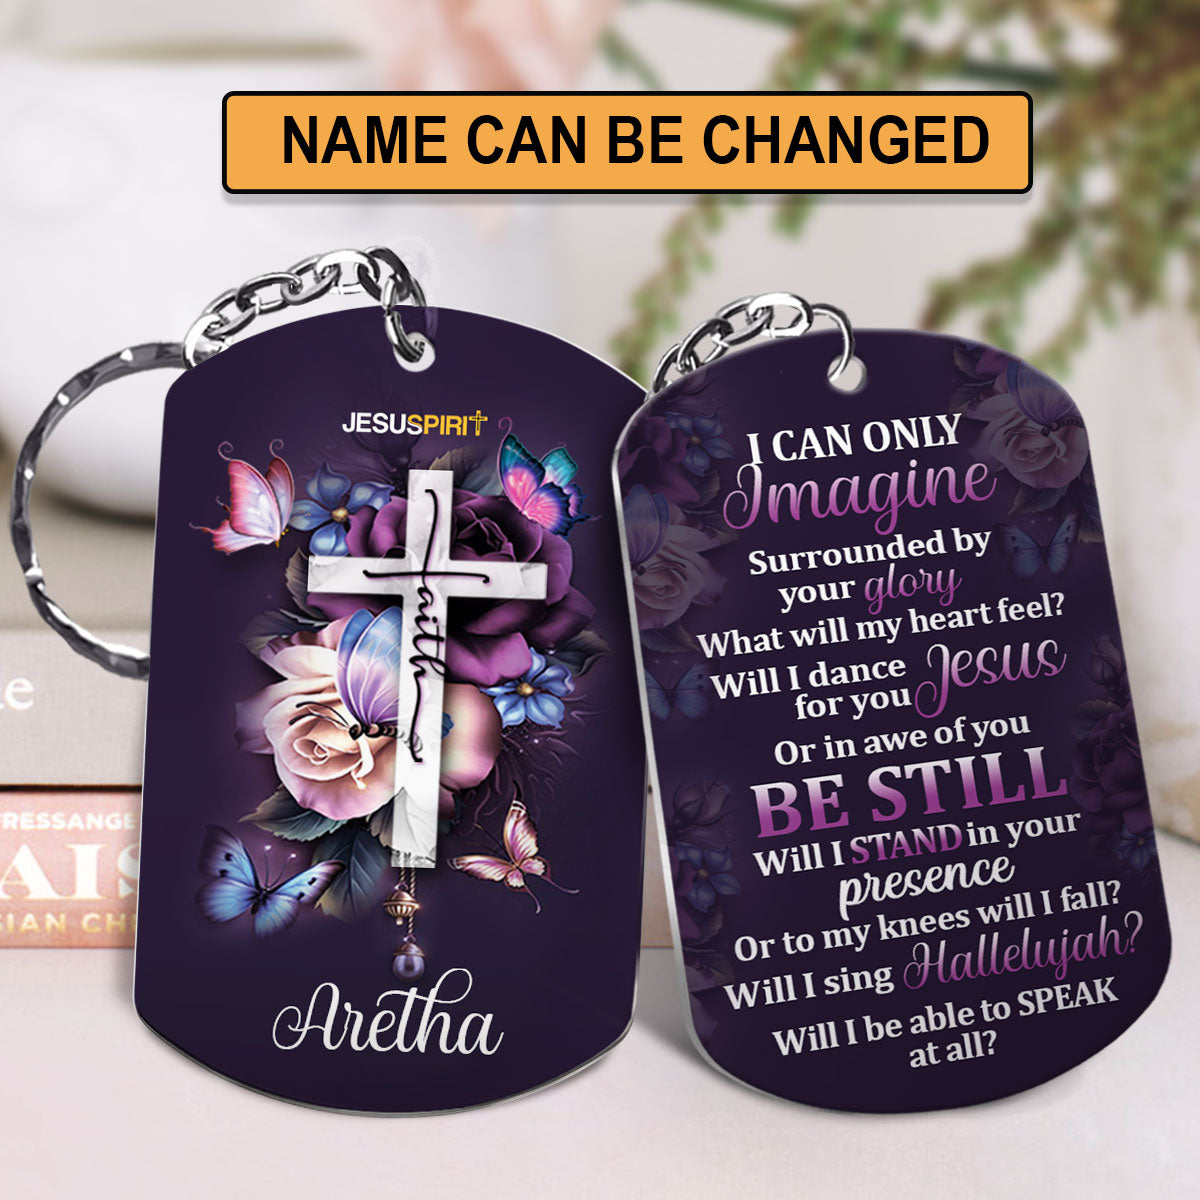 I Can Only Imagine - Personalized Aluminium Keychain HH175B